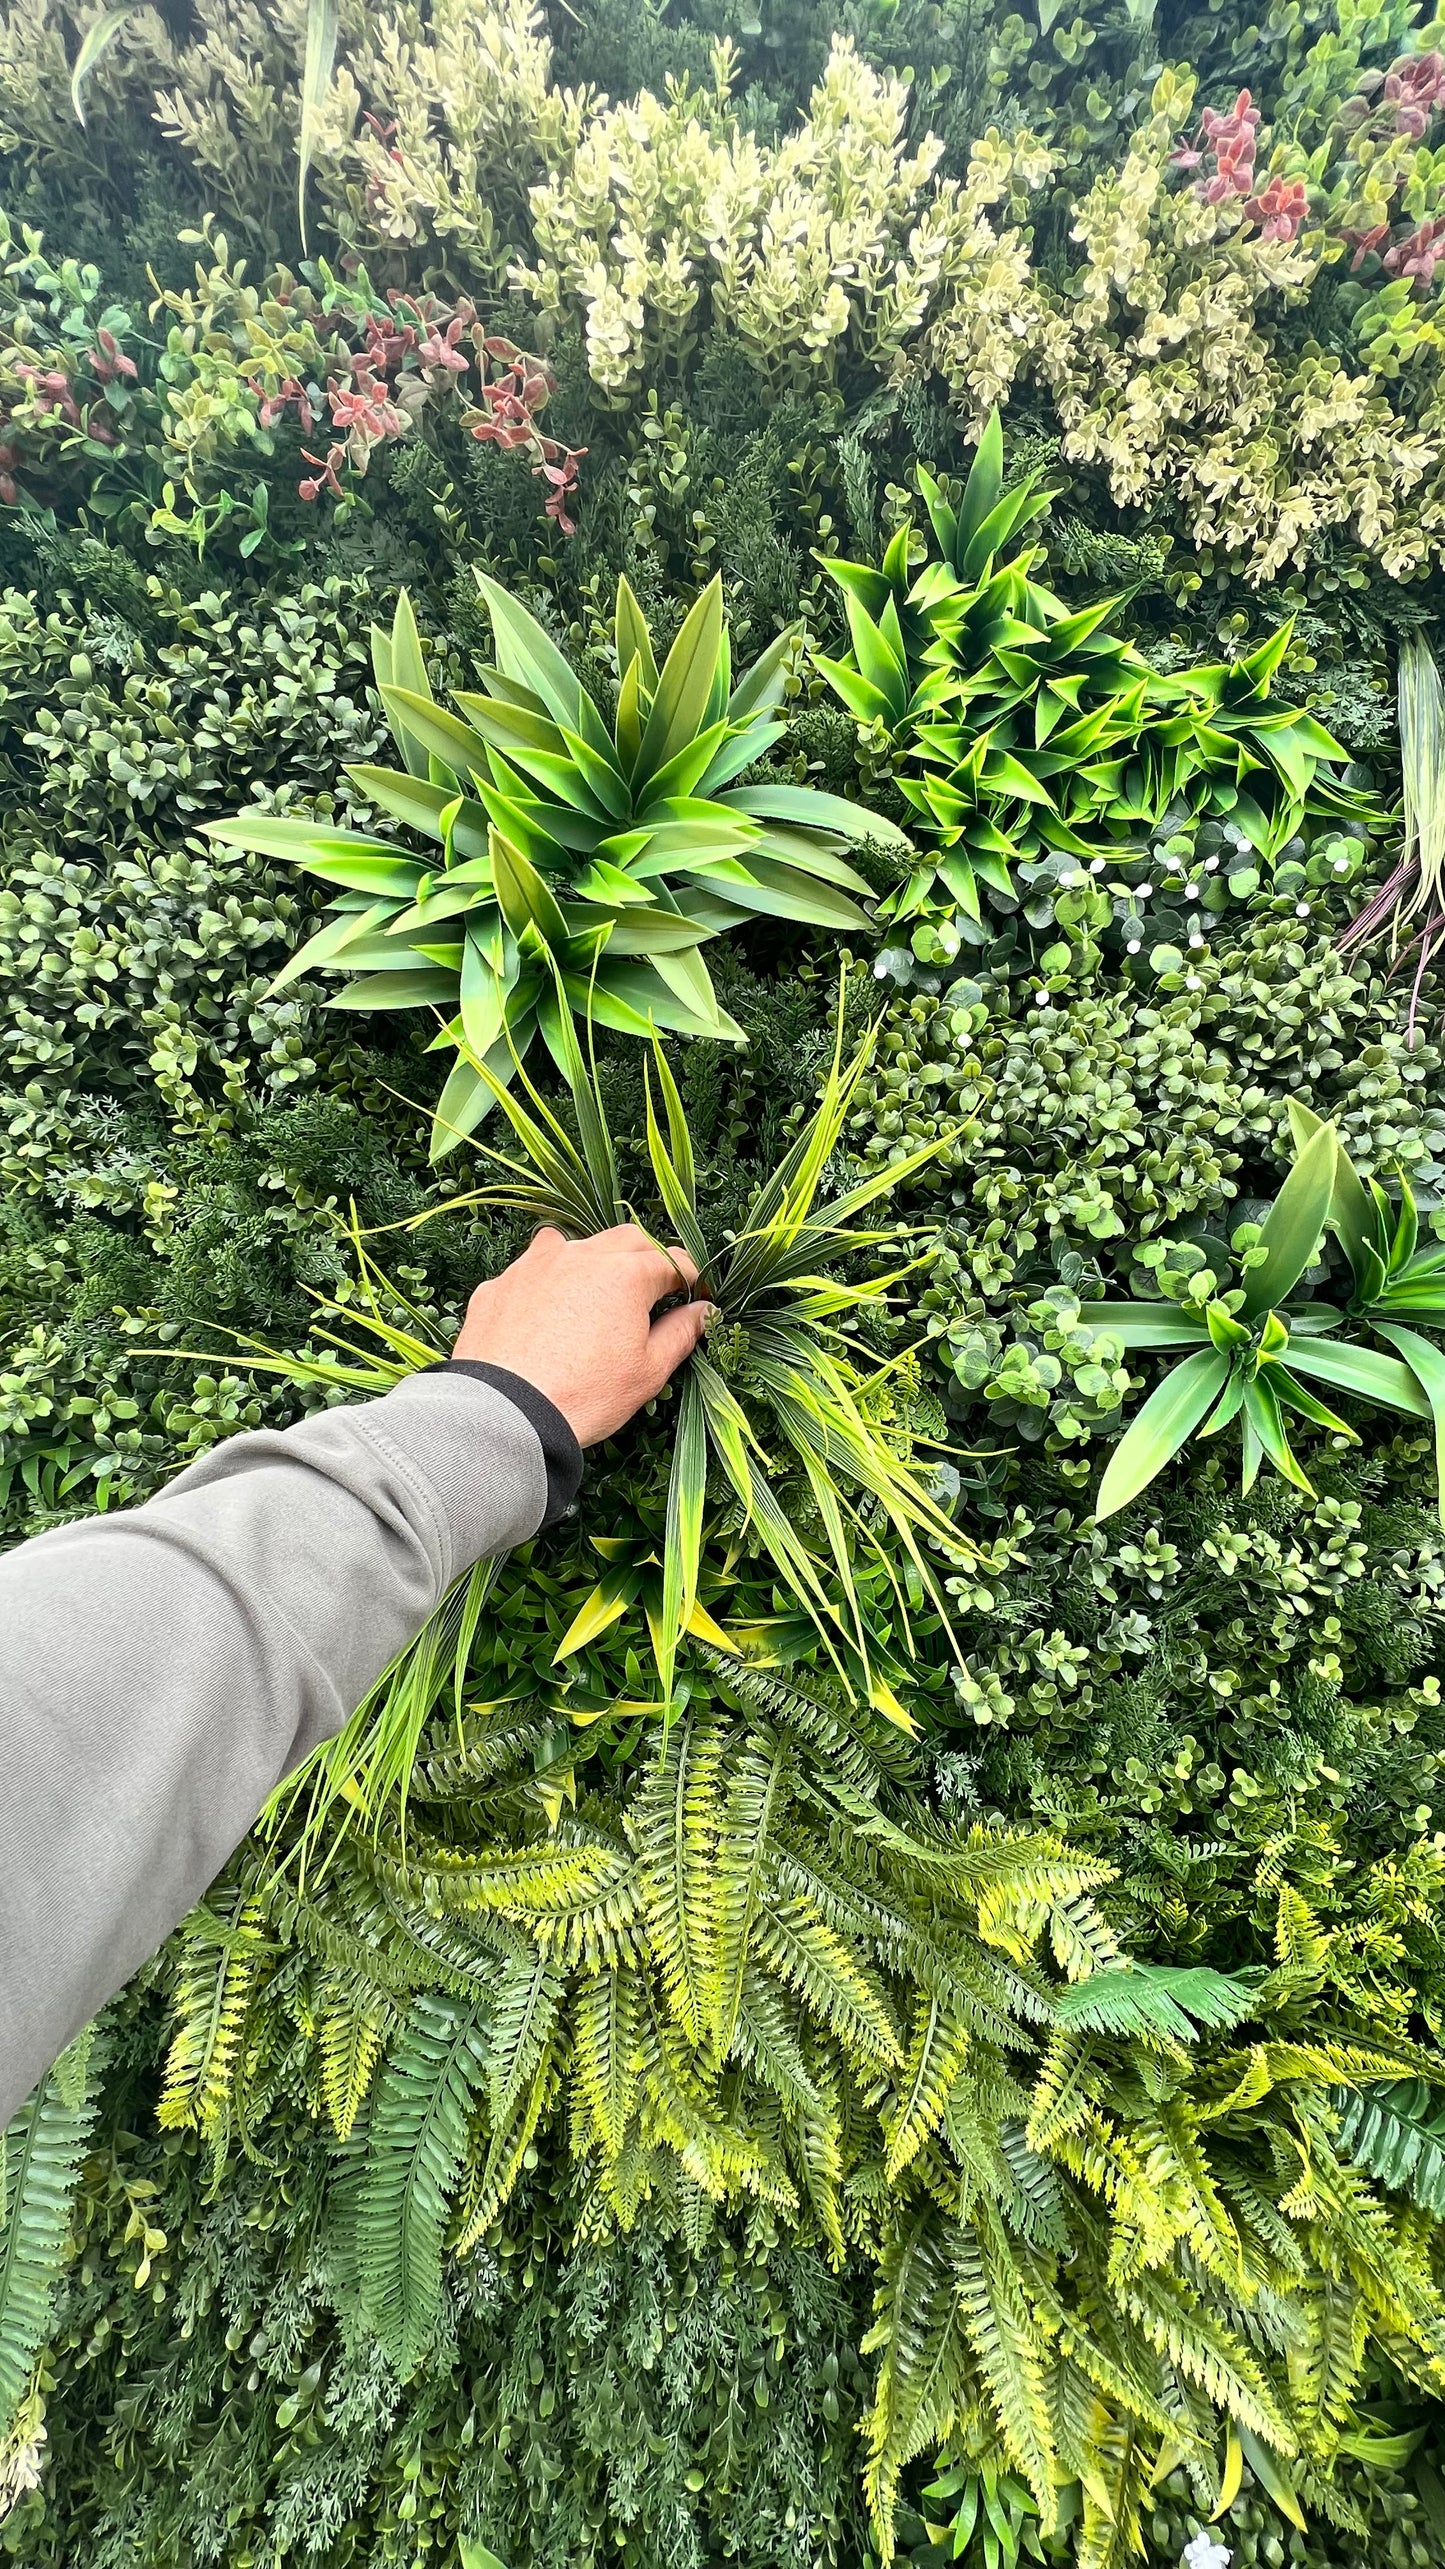 Artificial Plant wall